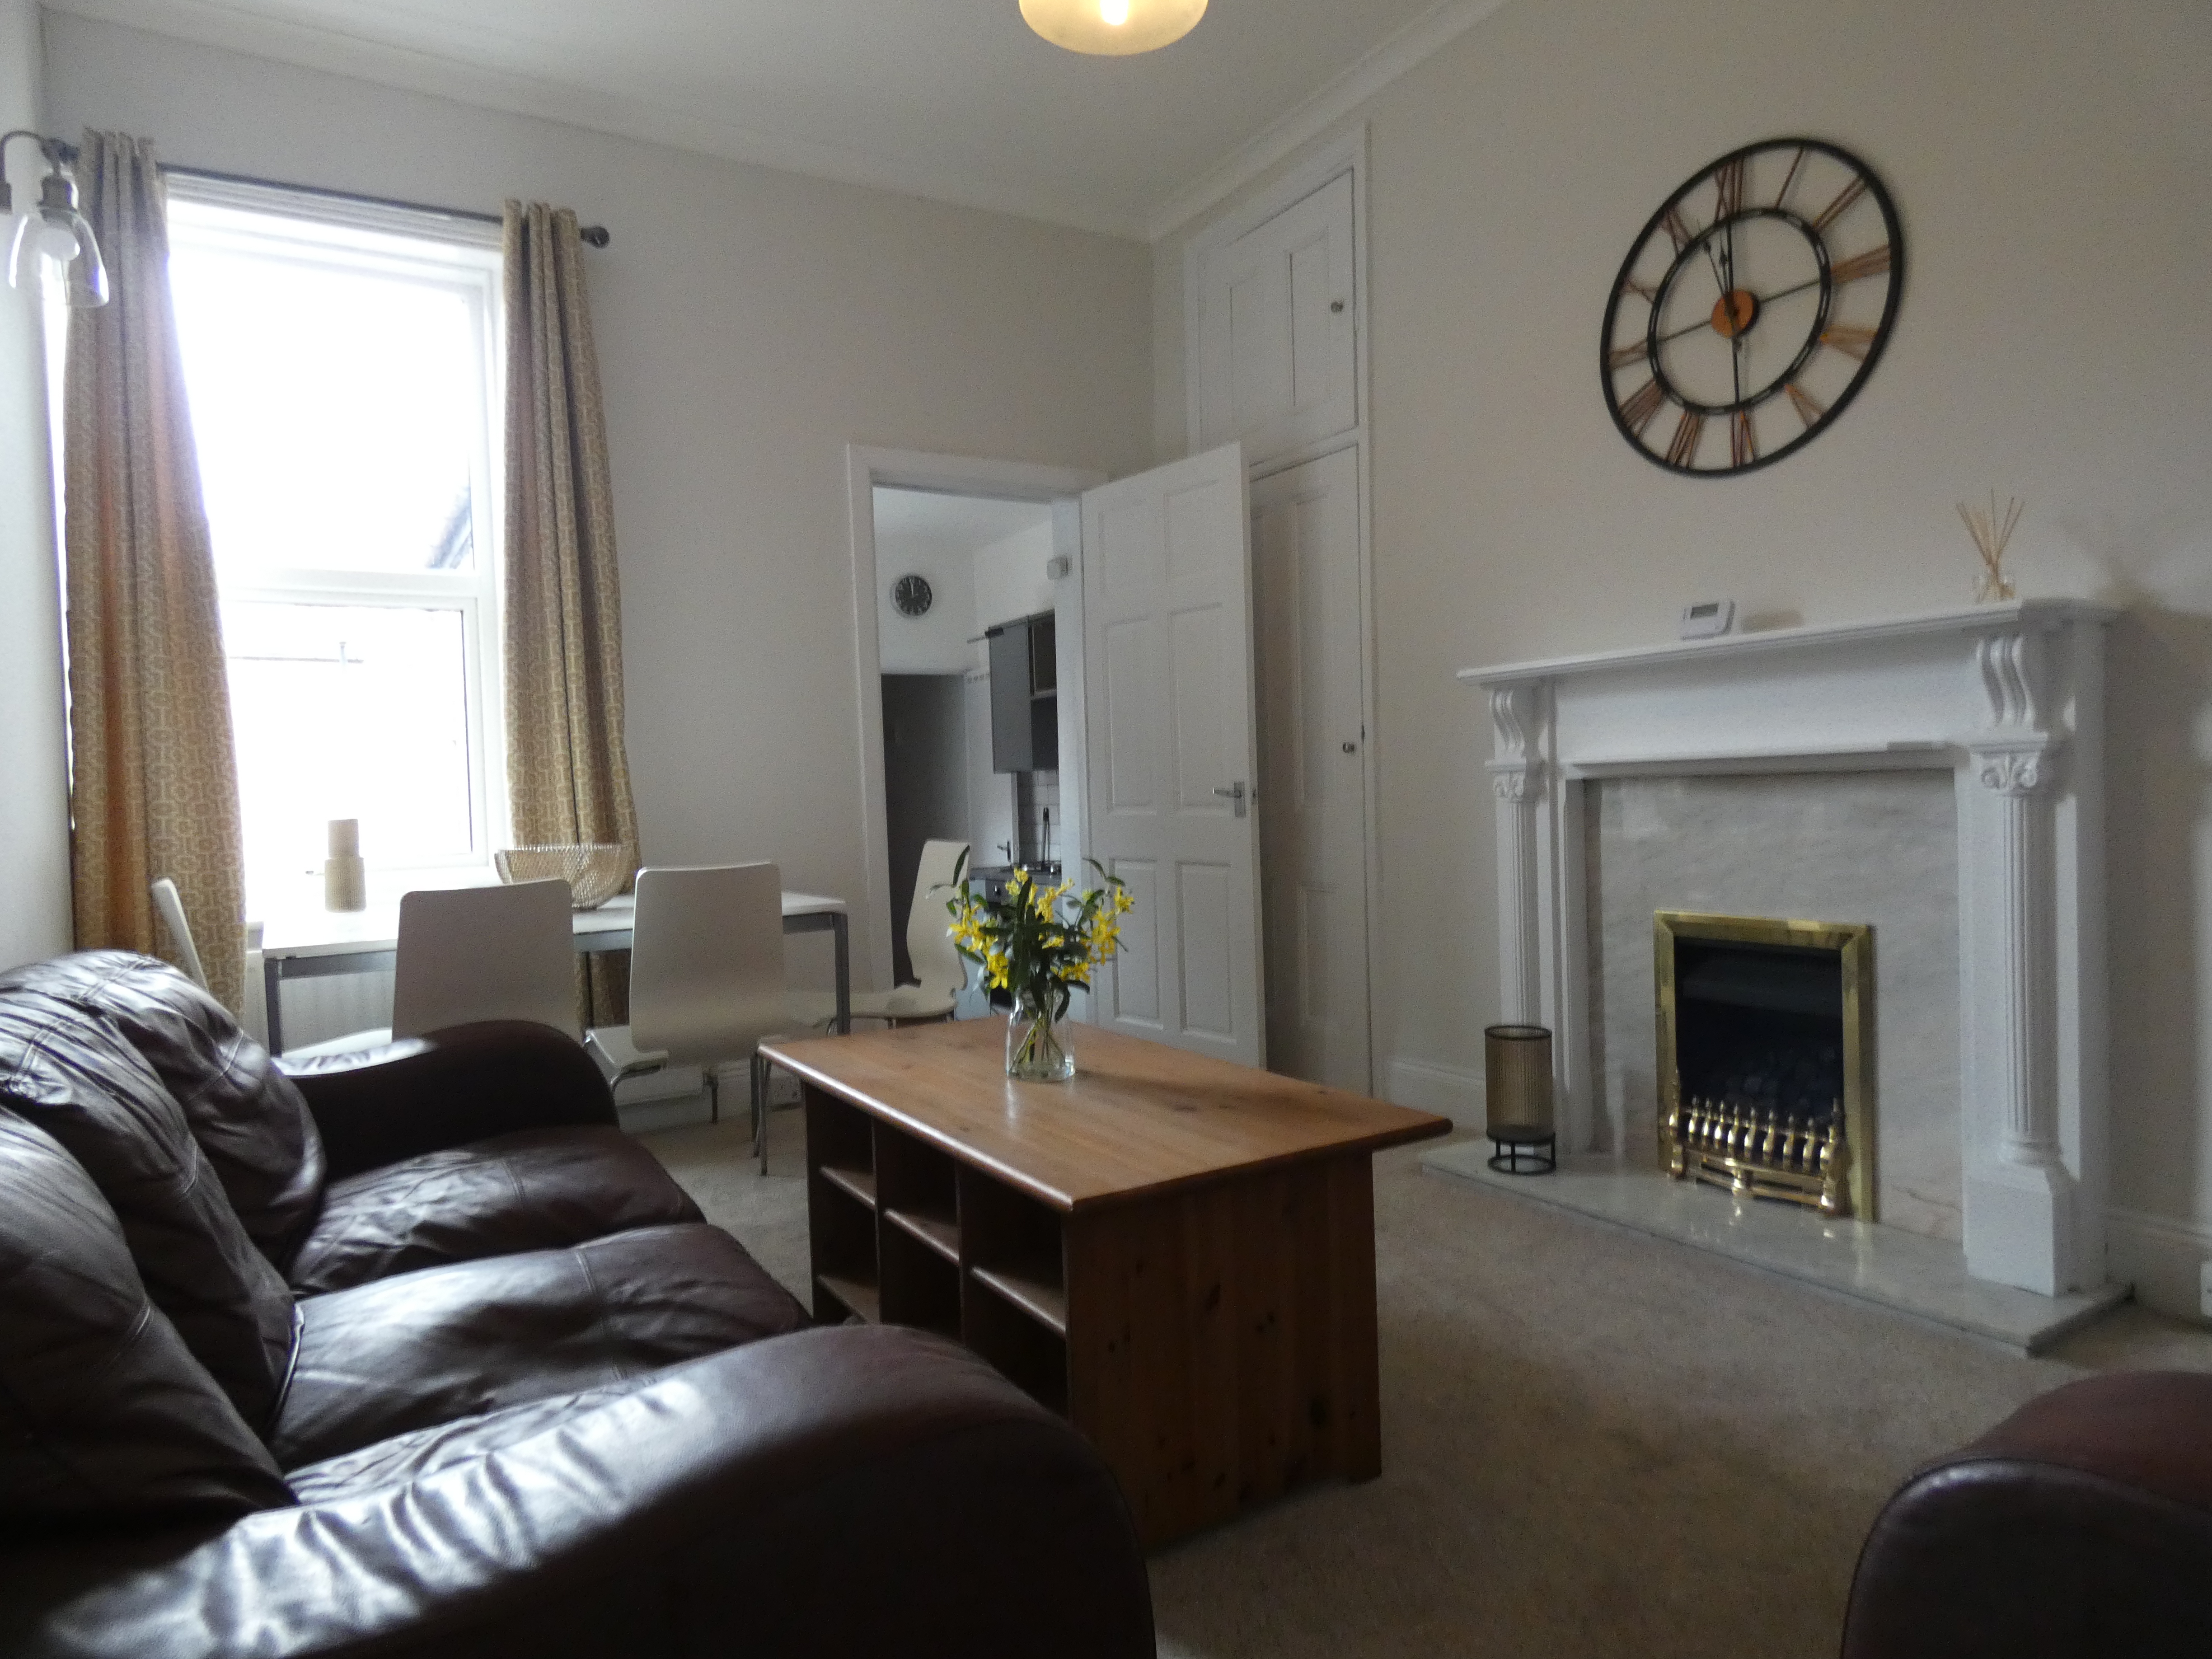 3 bed flat to rent in Warton Terrace, Newcastle upon tyne  - Property Image 2